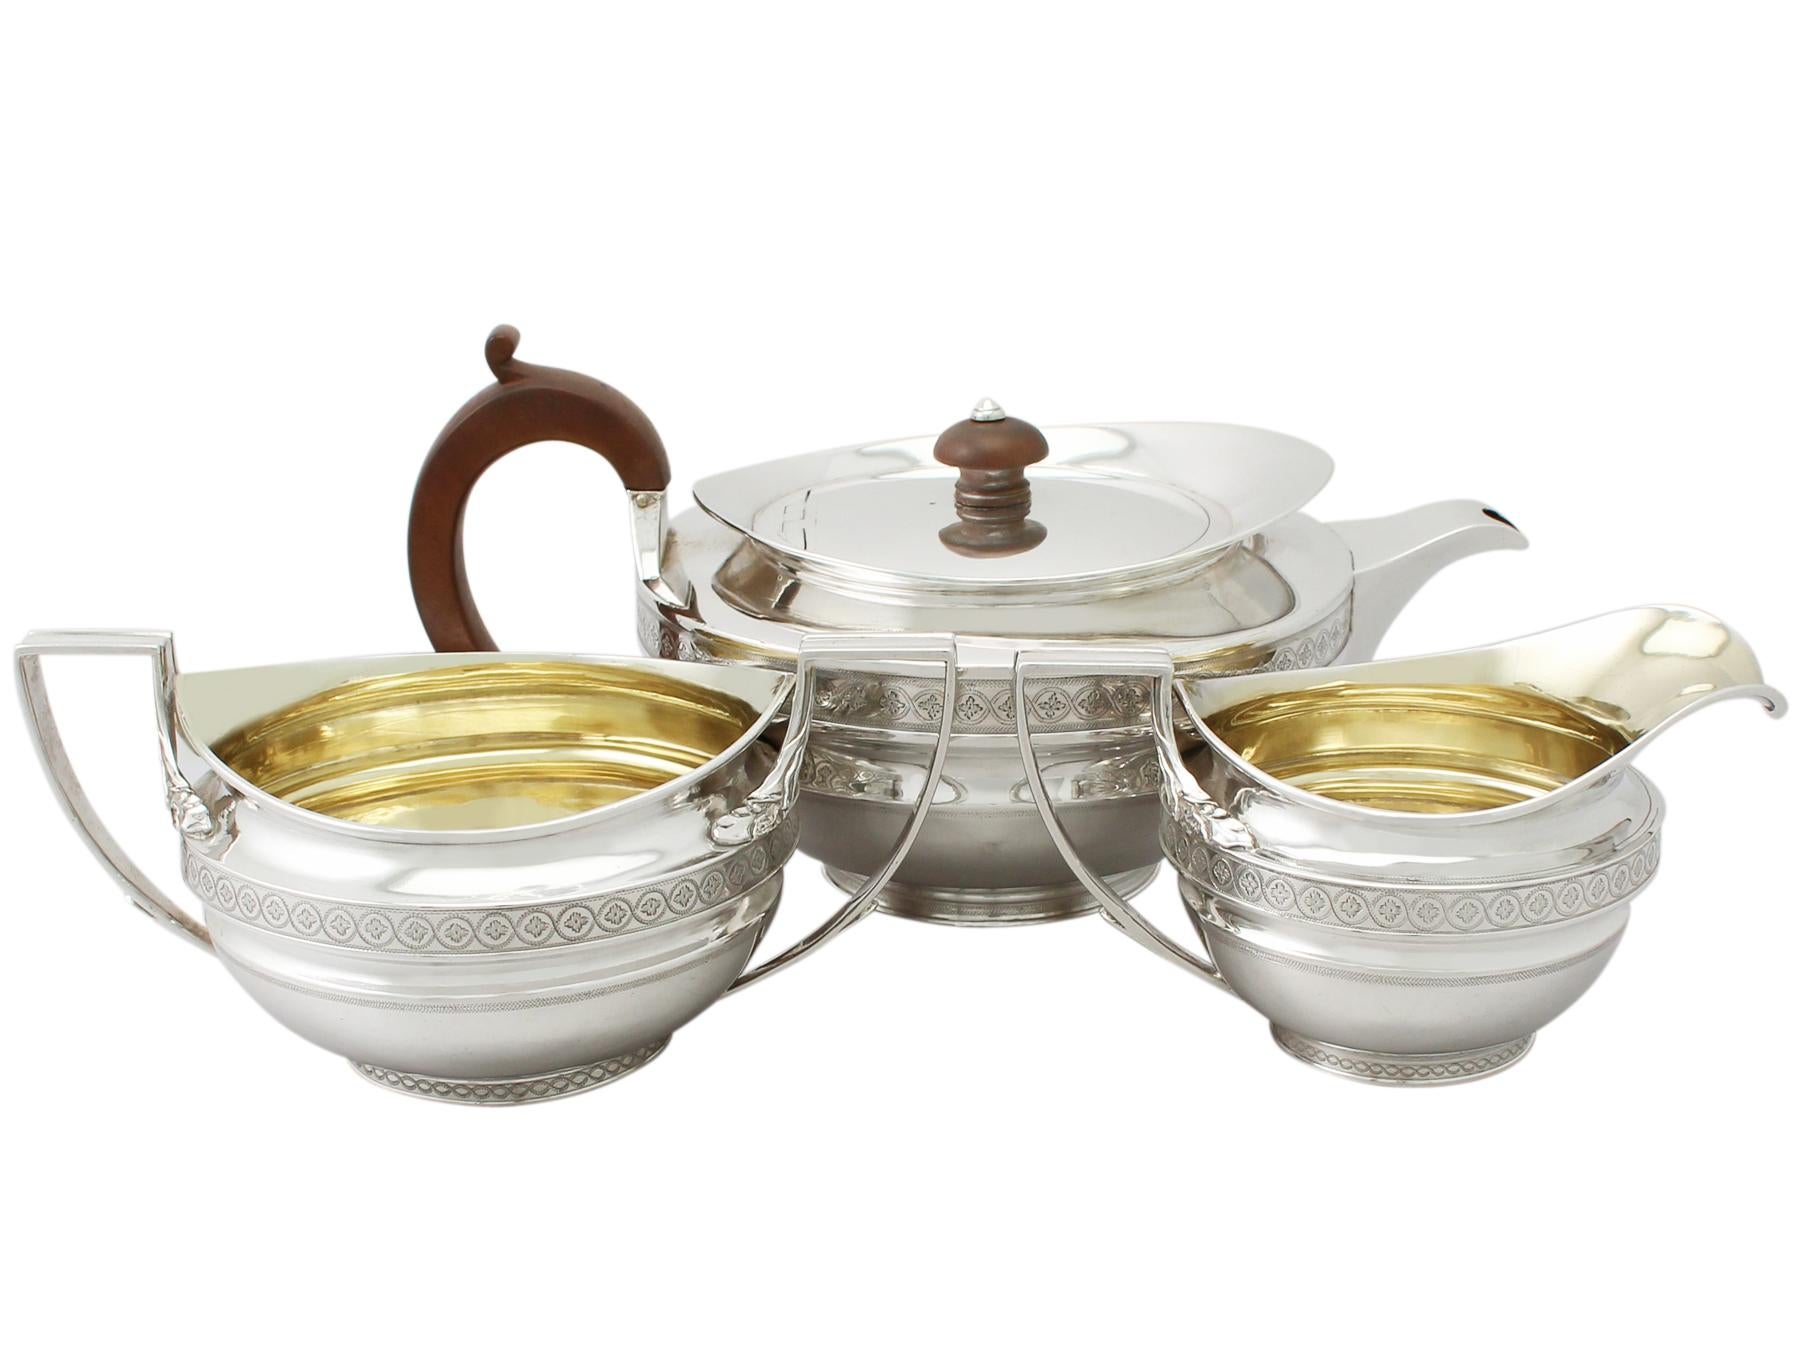 An exceptional, fine and impressive antique George III English sterling silver three piece tea service / Set; part of our silver teaware collection.

This exceptional antique George III sterling silver three piece tea service consists of a cream